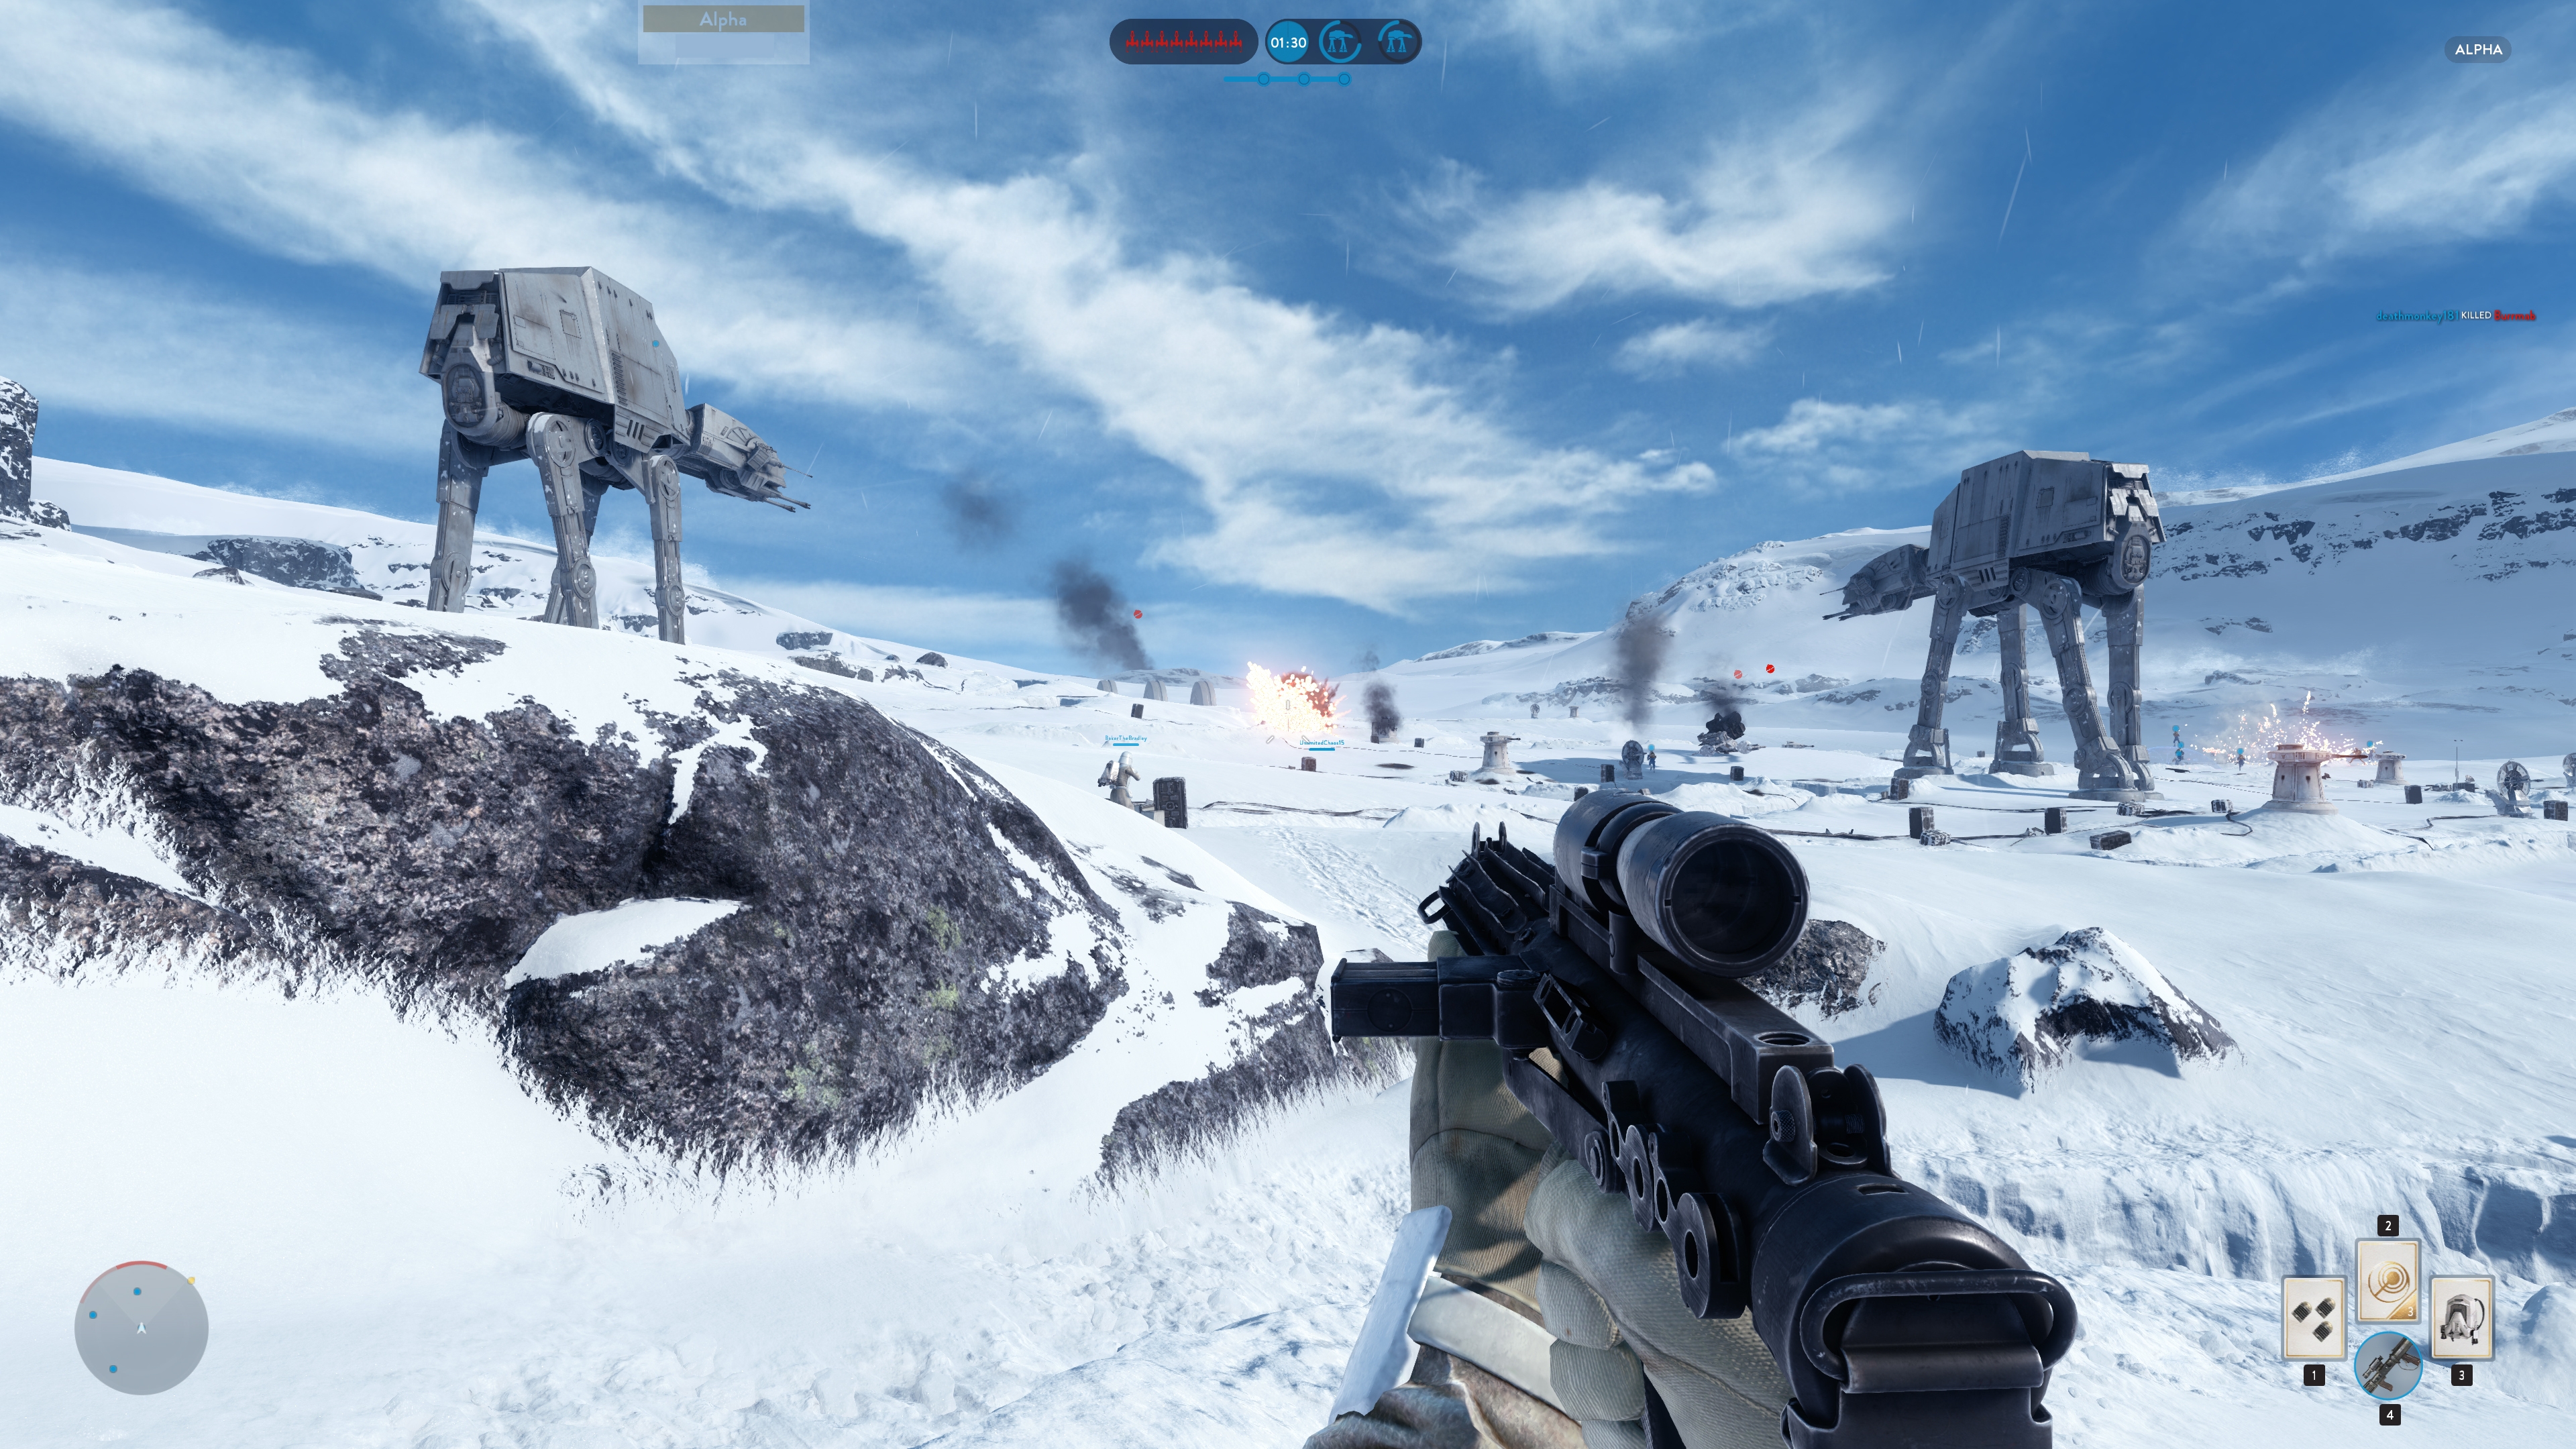 Star Wars Battlefront Gameplay for 3840 x 2160 Ultra HD resolution